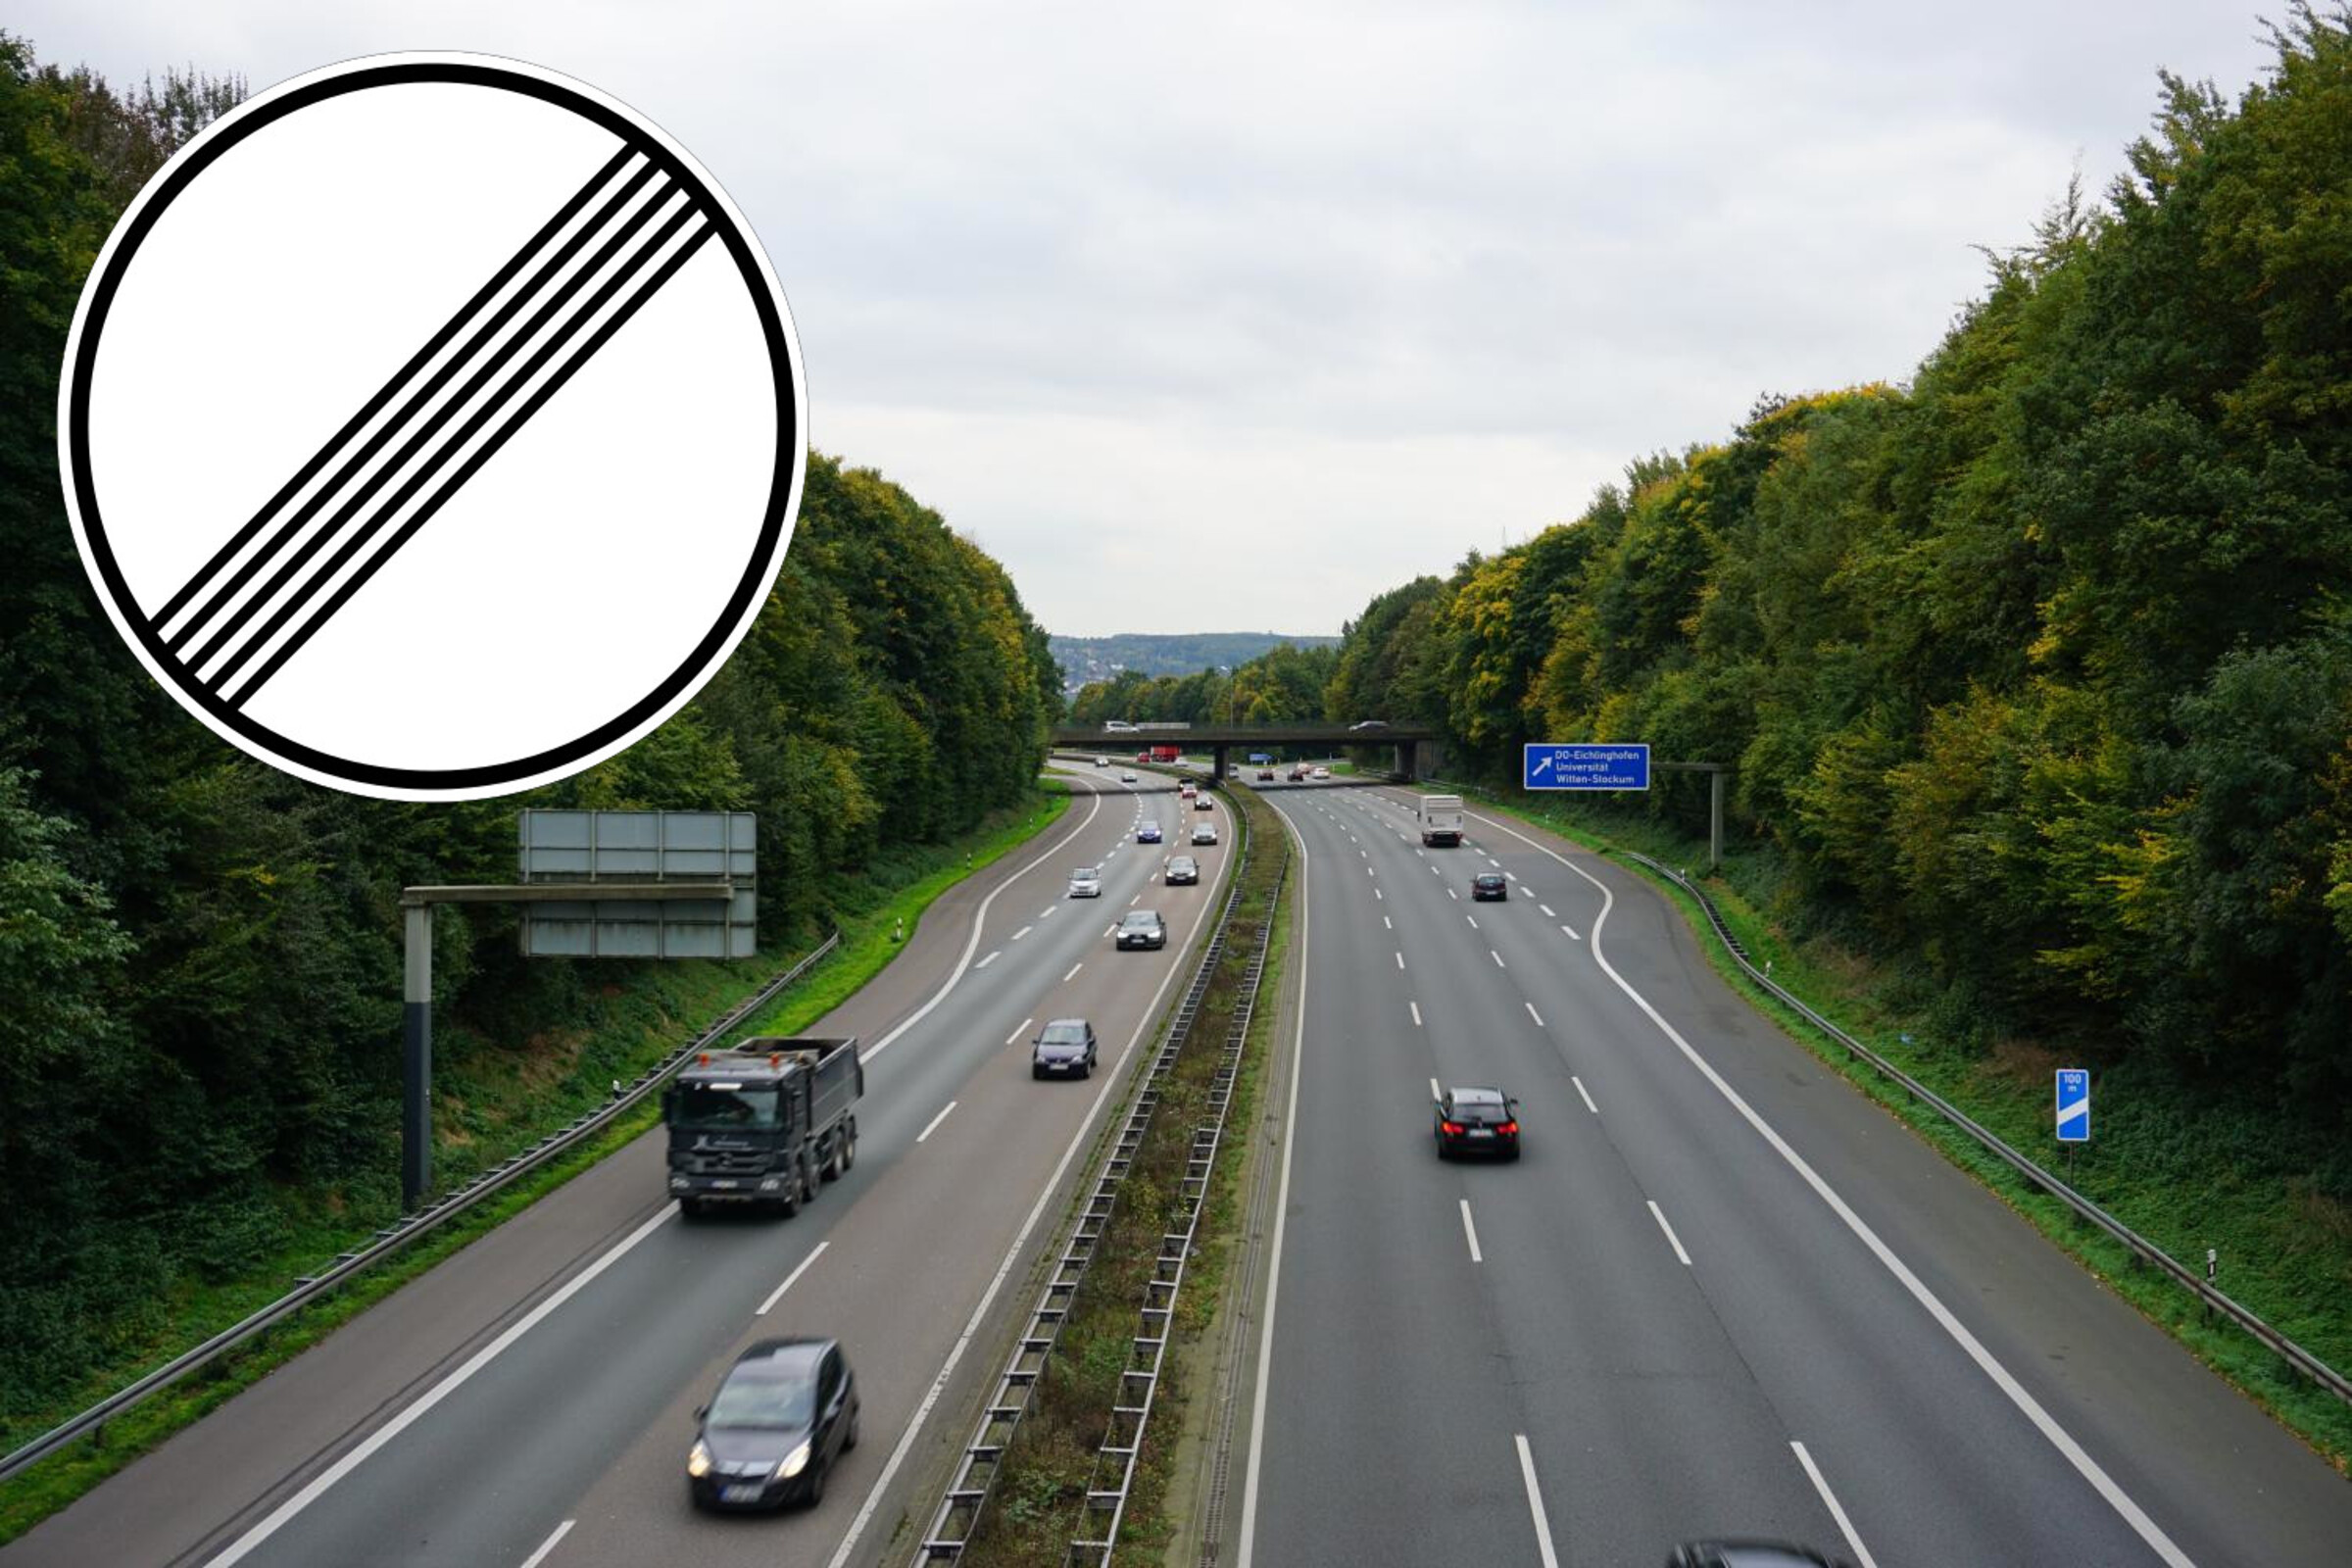 The autobahn A45 in Dortmund-Oespel and the road sign for “all restrictions lifted”.